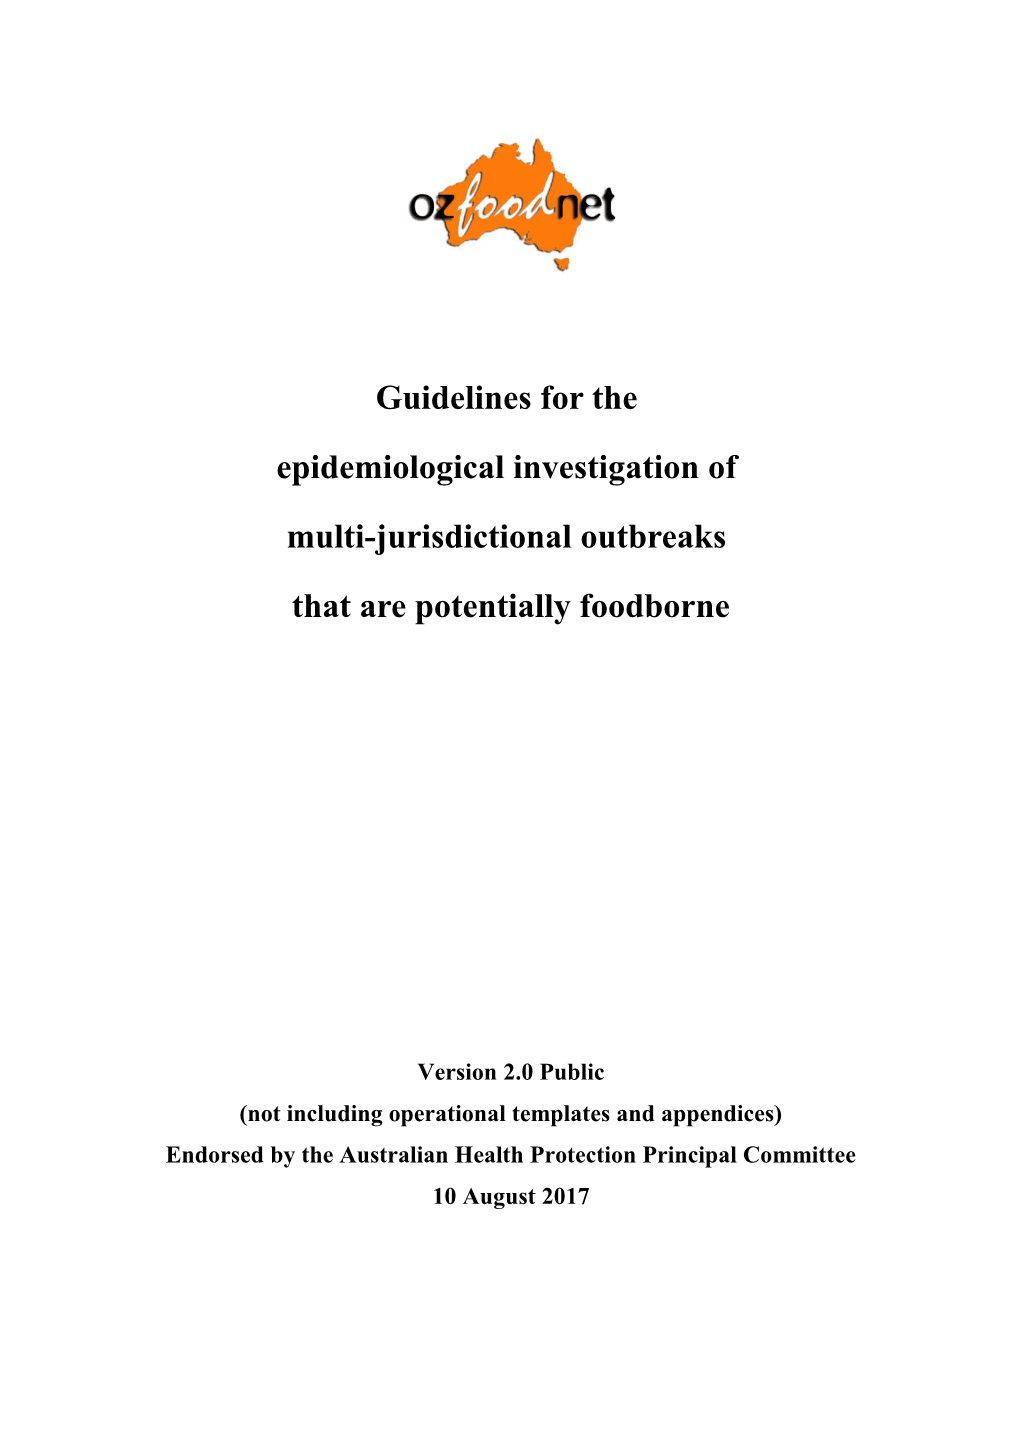 Guidelines for the Epidemiological Investigation of Multi-Jurisdictional Outbreaks That